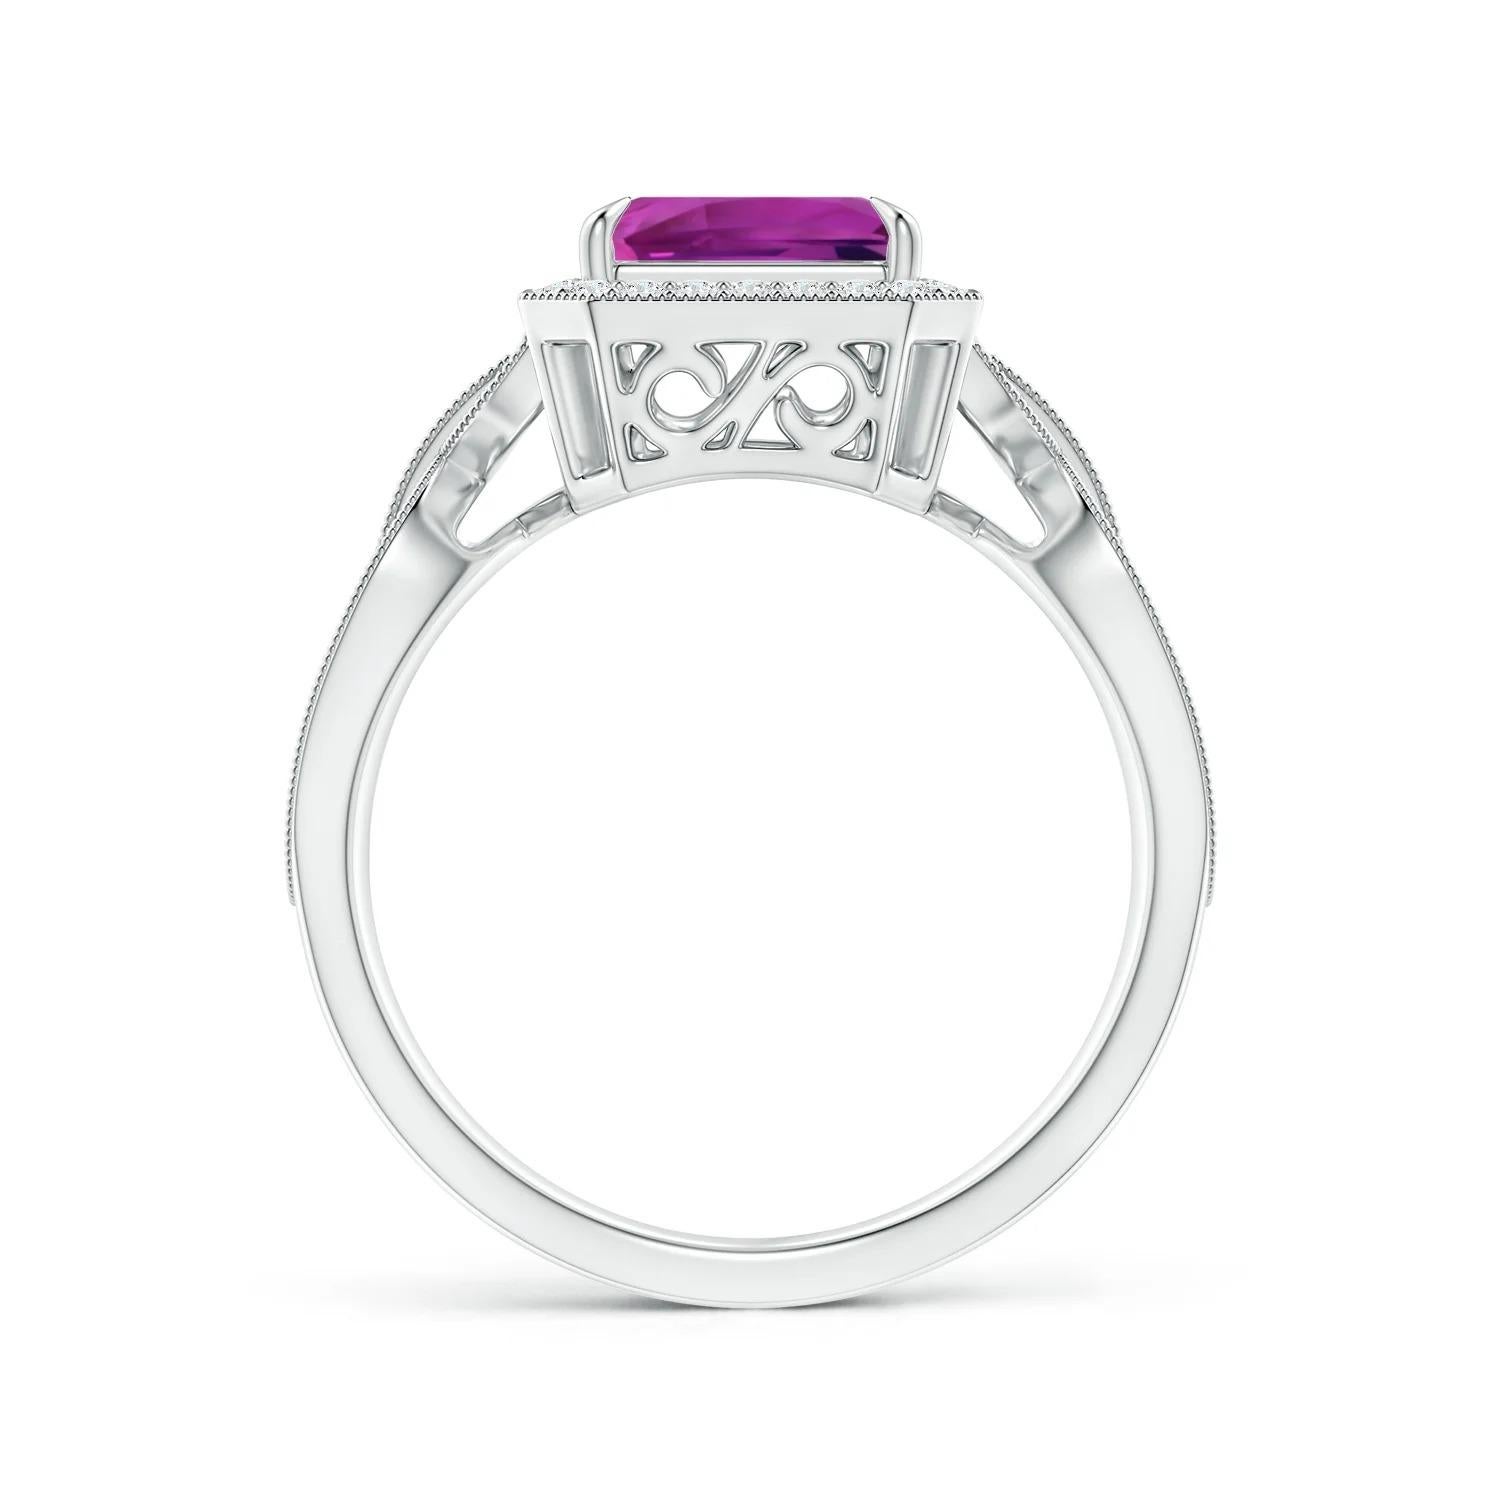 For Sale:  Angara Gia Certified Natural Pink Sapphire Ring in White Gold with Diamond Halo 2